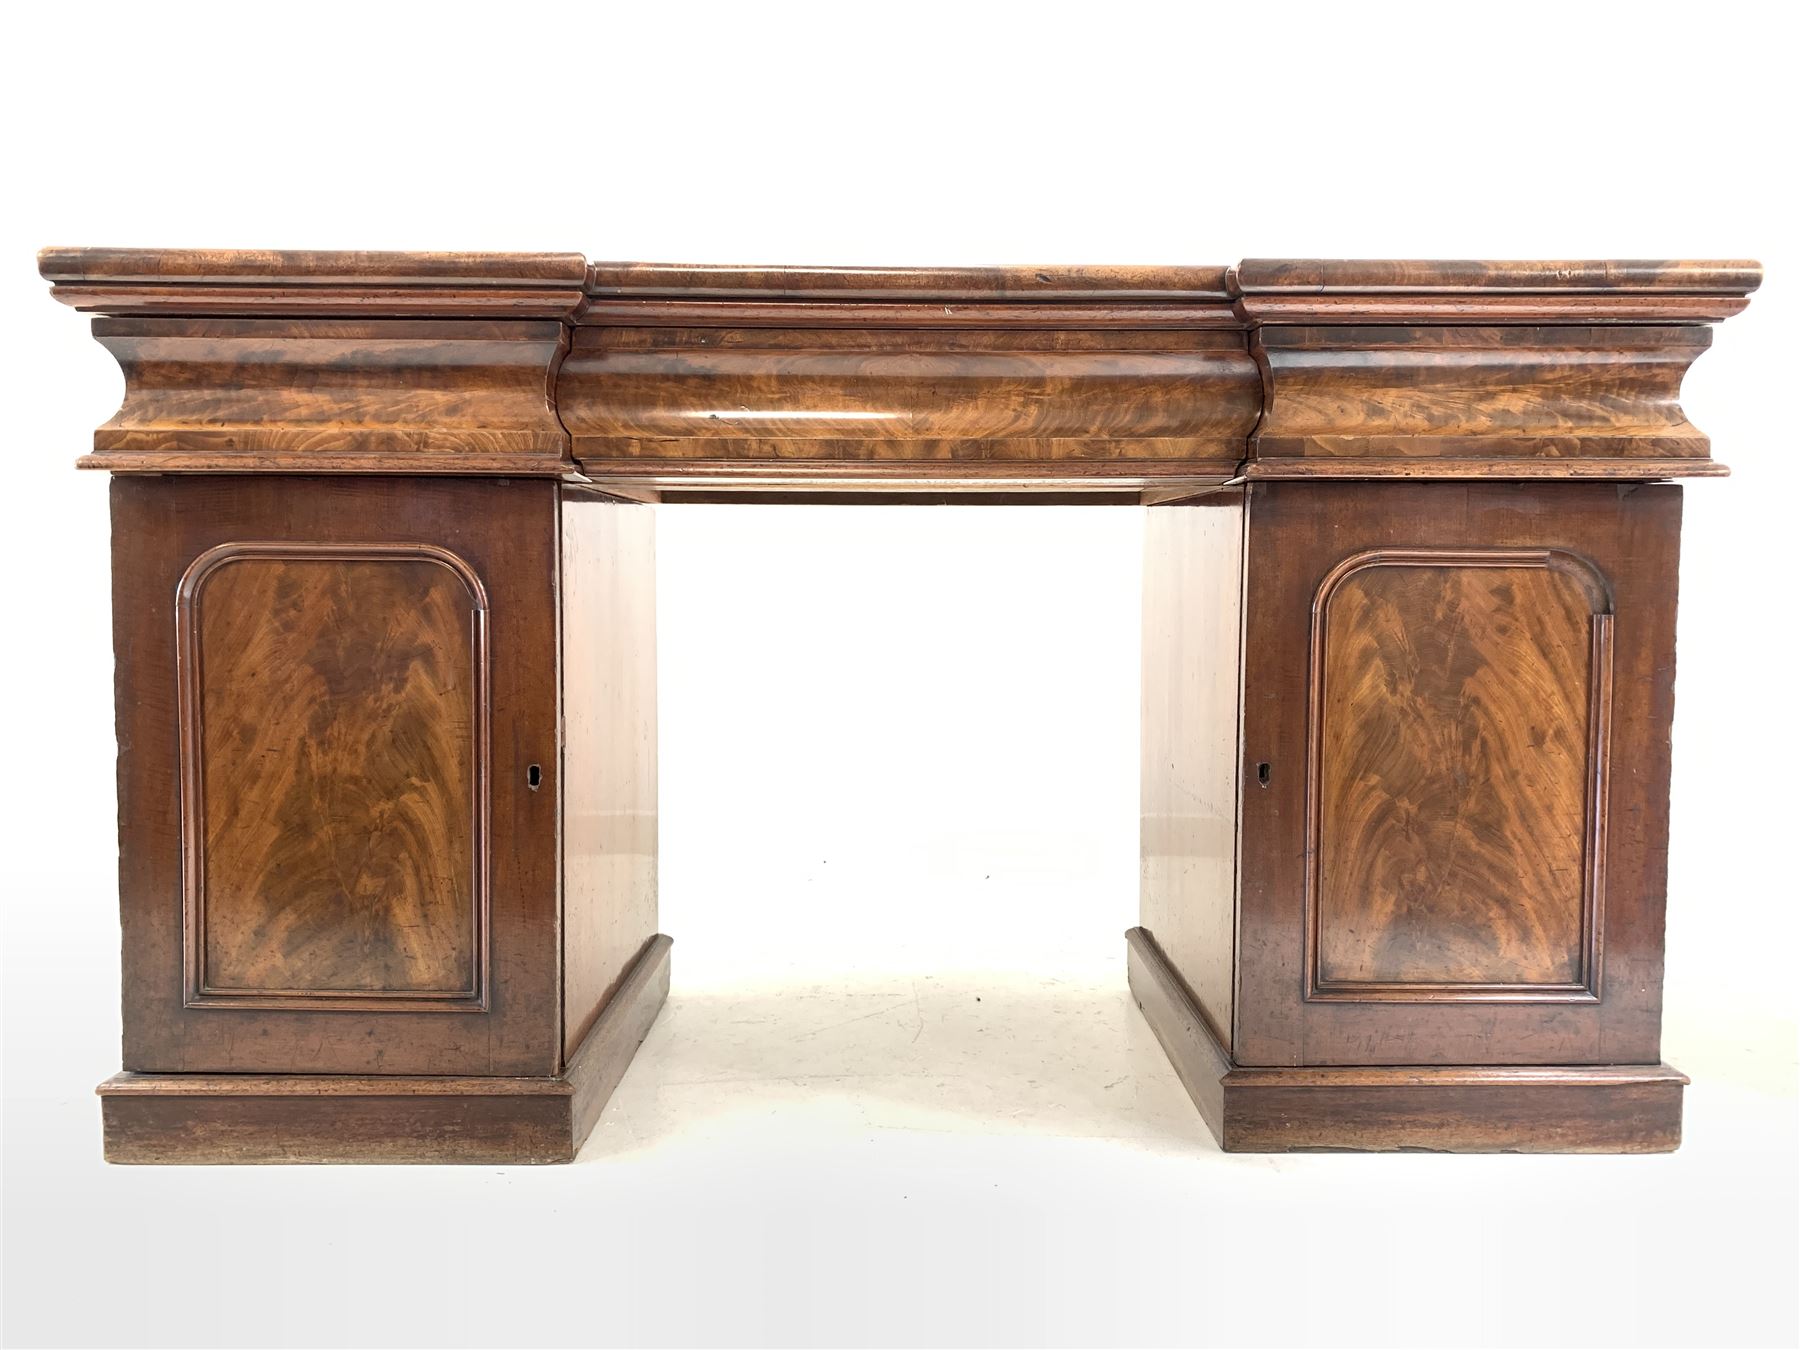 Early 19th century figured mahogany twin pedestal sideboard - Image 2 of 6